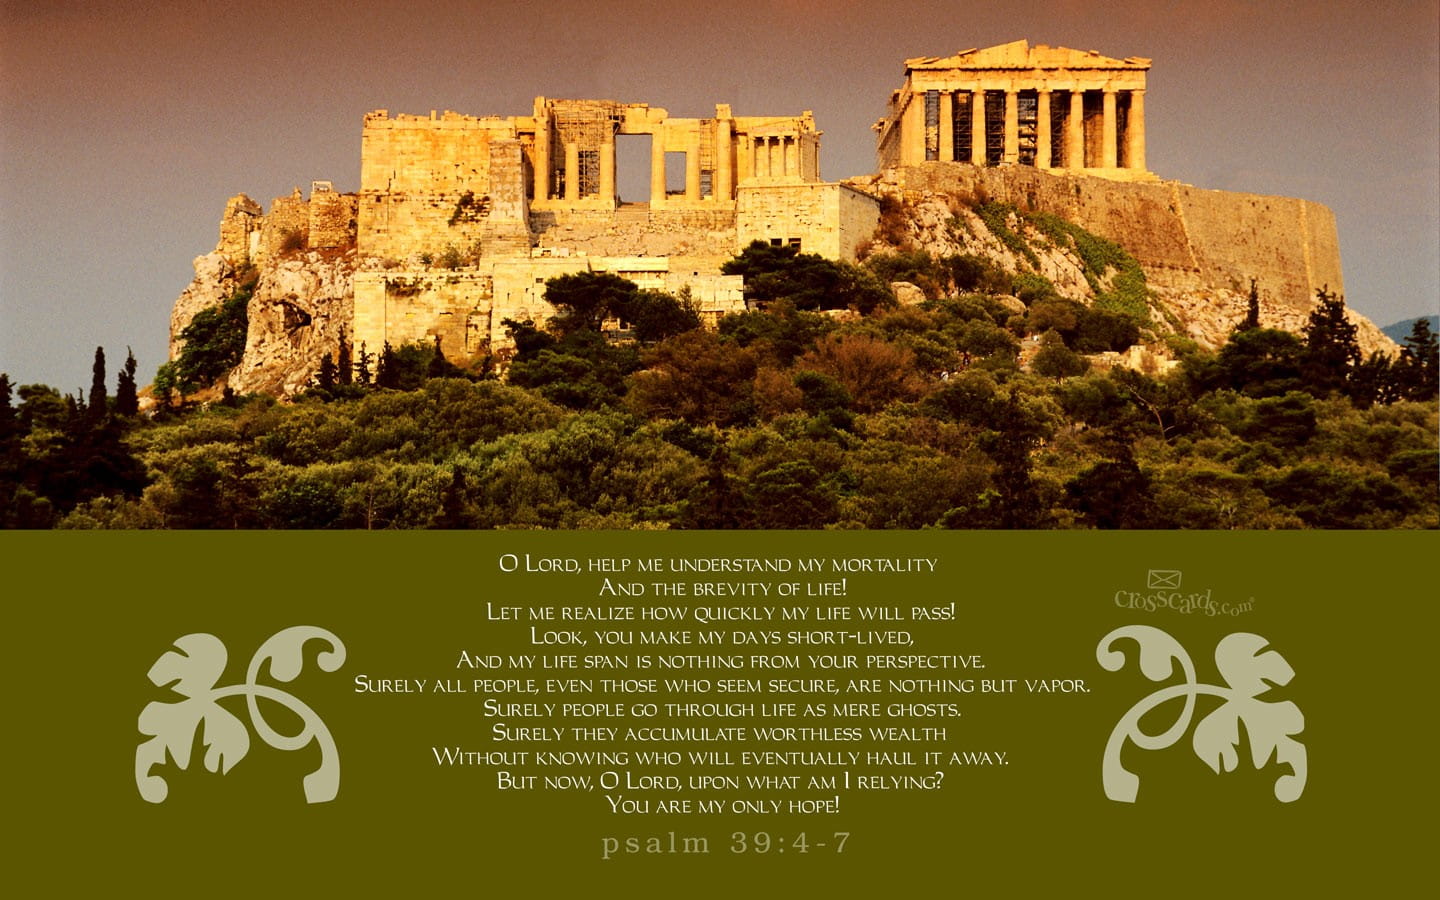 Greece - Psalm 39:4-7 - Bible Verses and Scripture Wallpaper for Phone or Computer1440 x 900